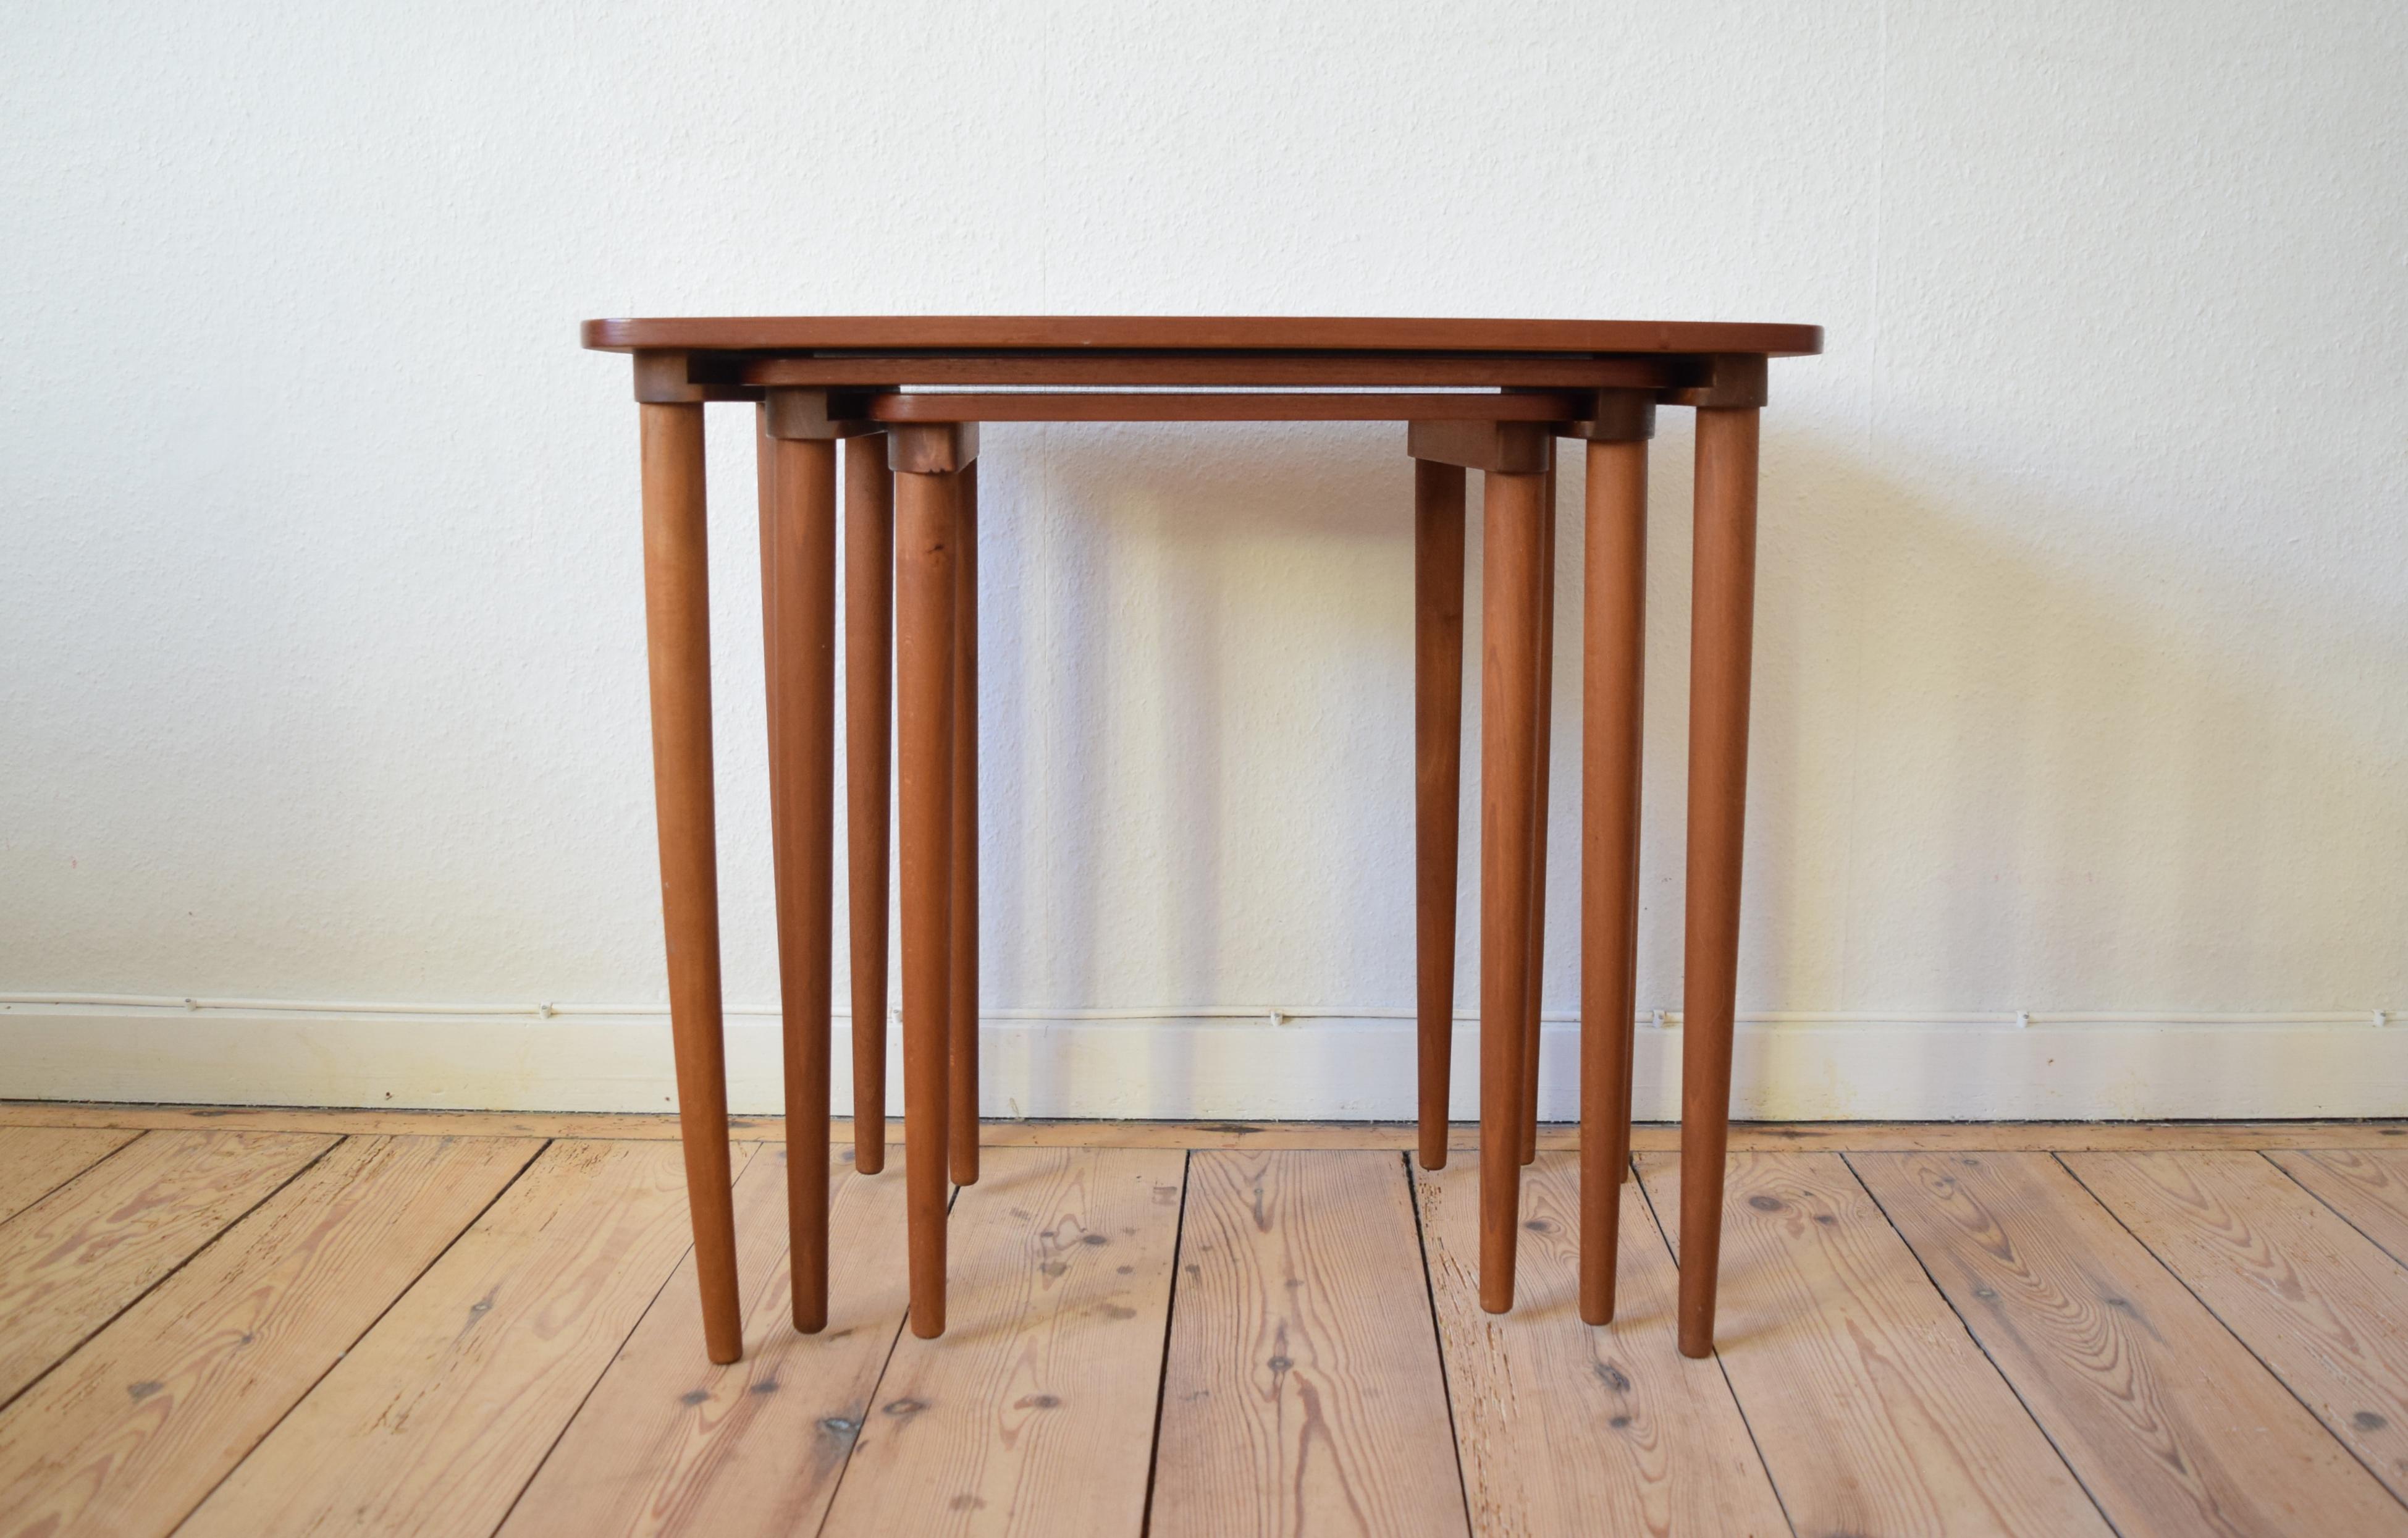 Teak nest of tables manufactured in Denmark in the 1950s-1960s. The tables 'nest' by means of a groove on the underside of the top-plates. There are very few marks on this set and the tables still have a dark red teak hue. We may be able to remove